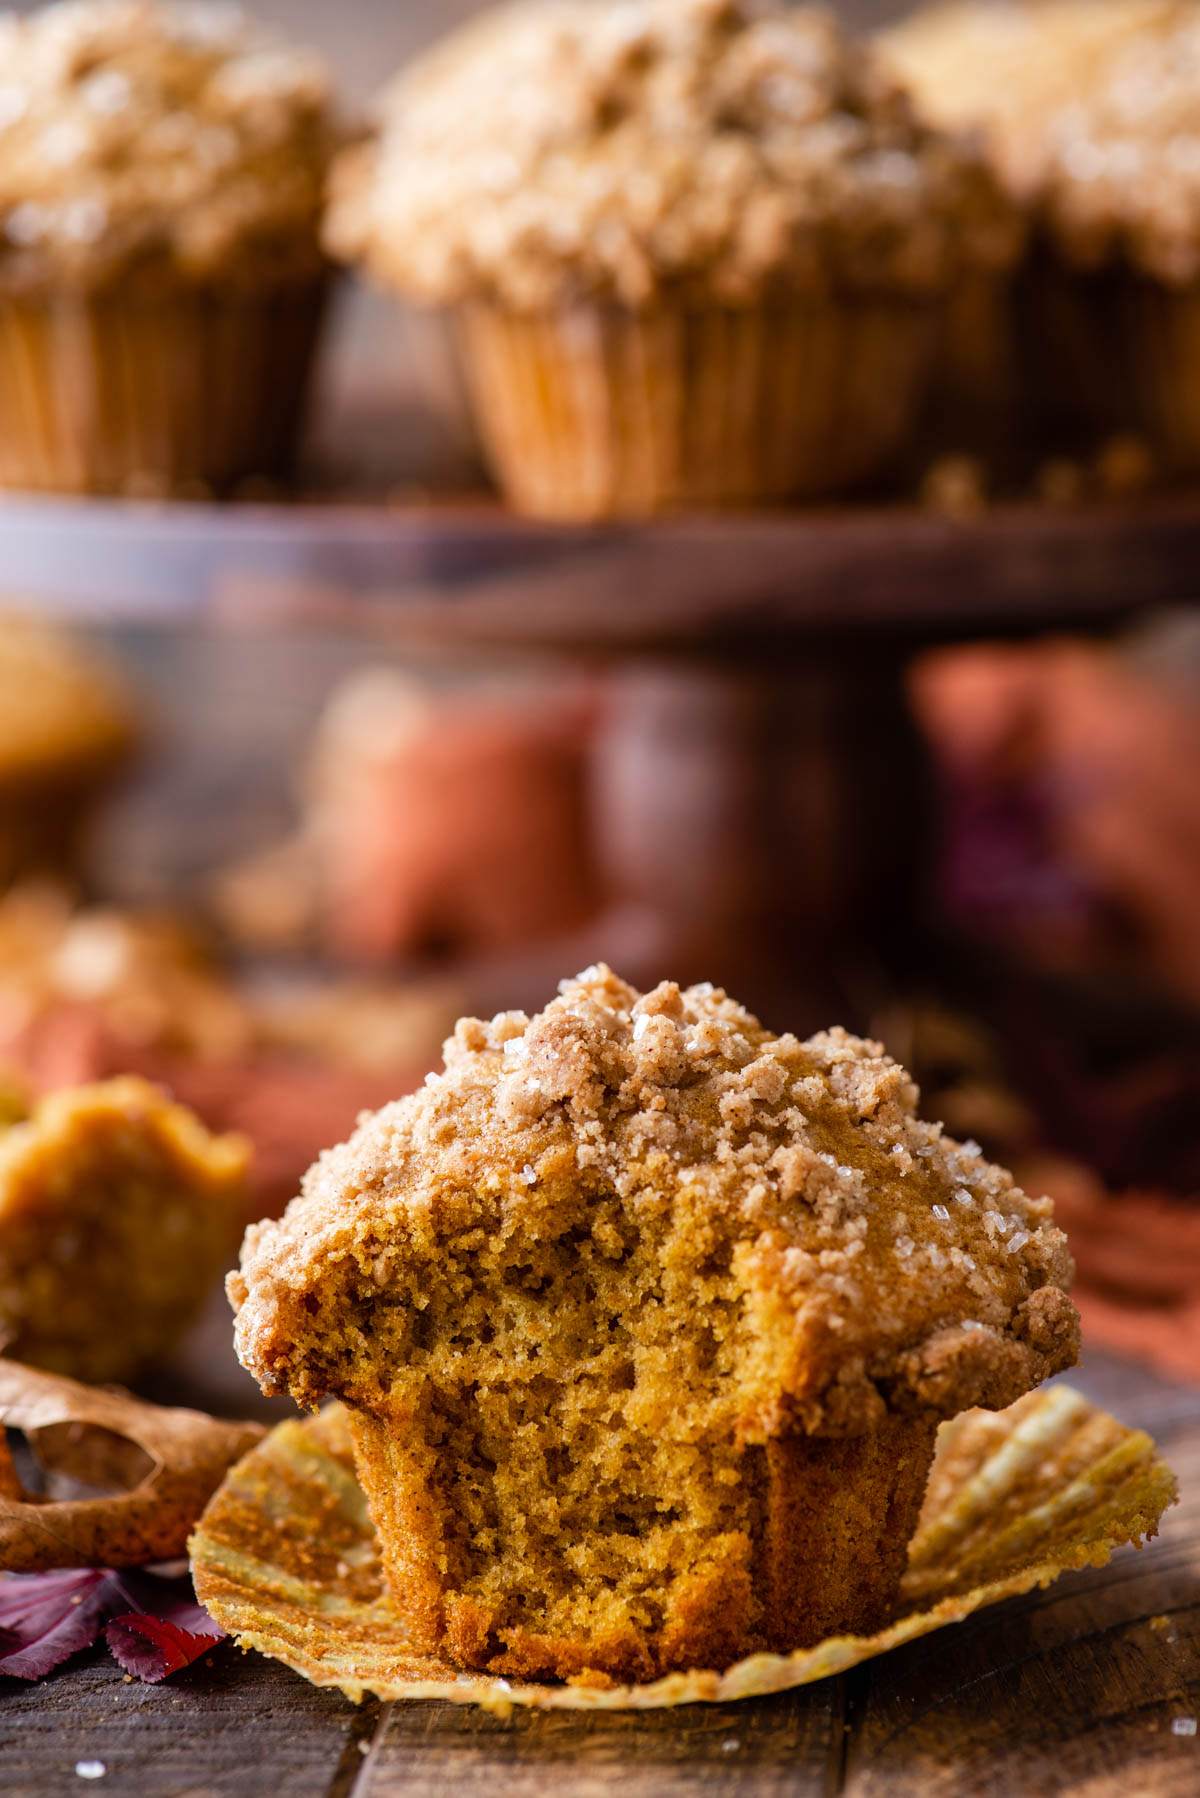 muffin with bite removed on wood background